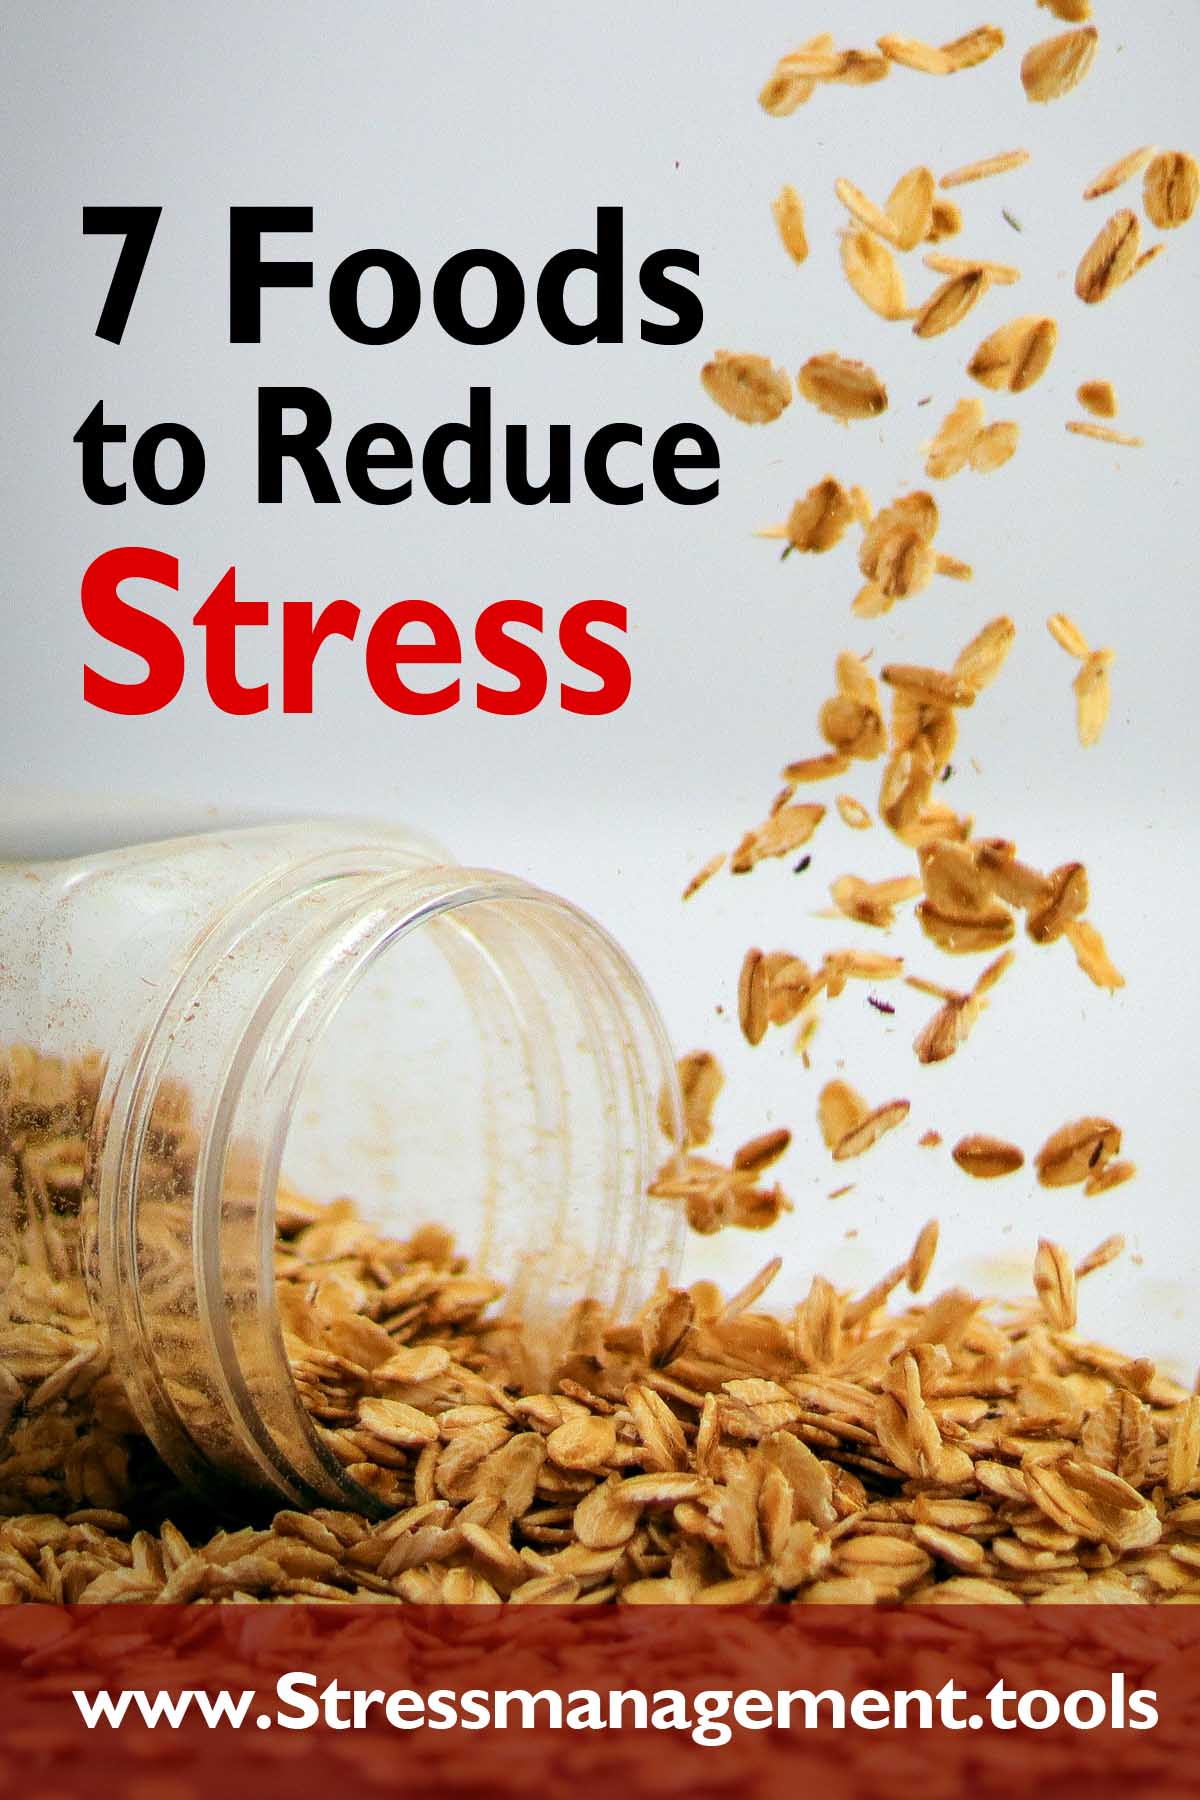 Seven Foods to Reduce Stress